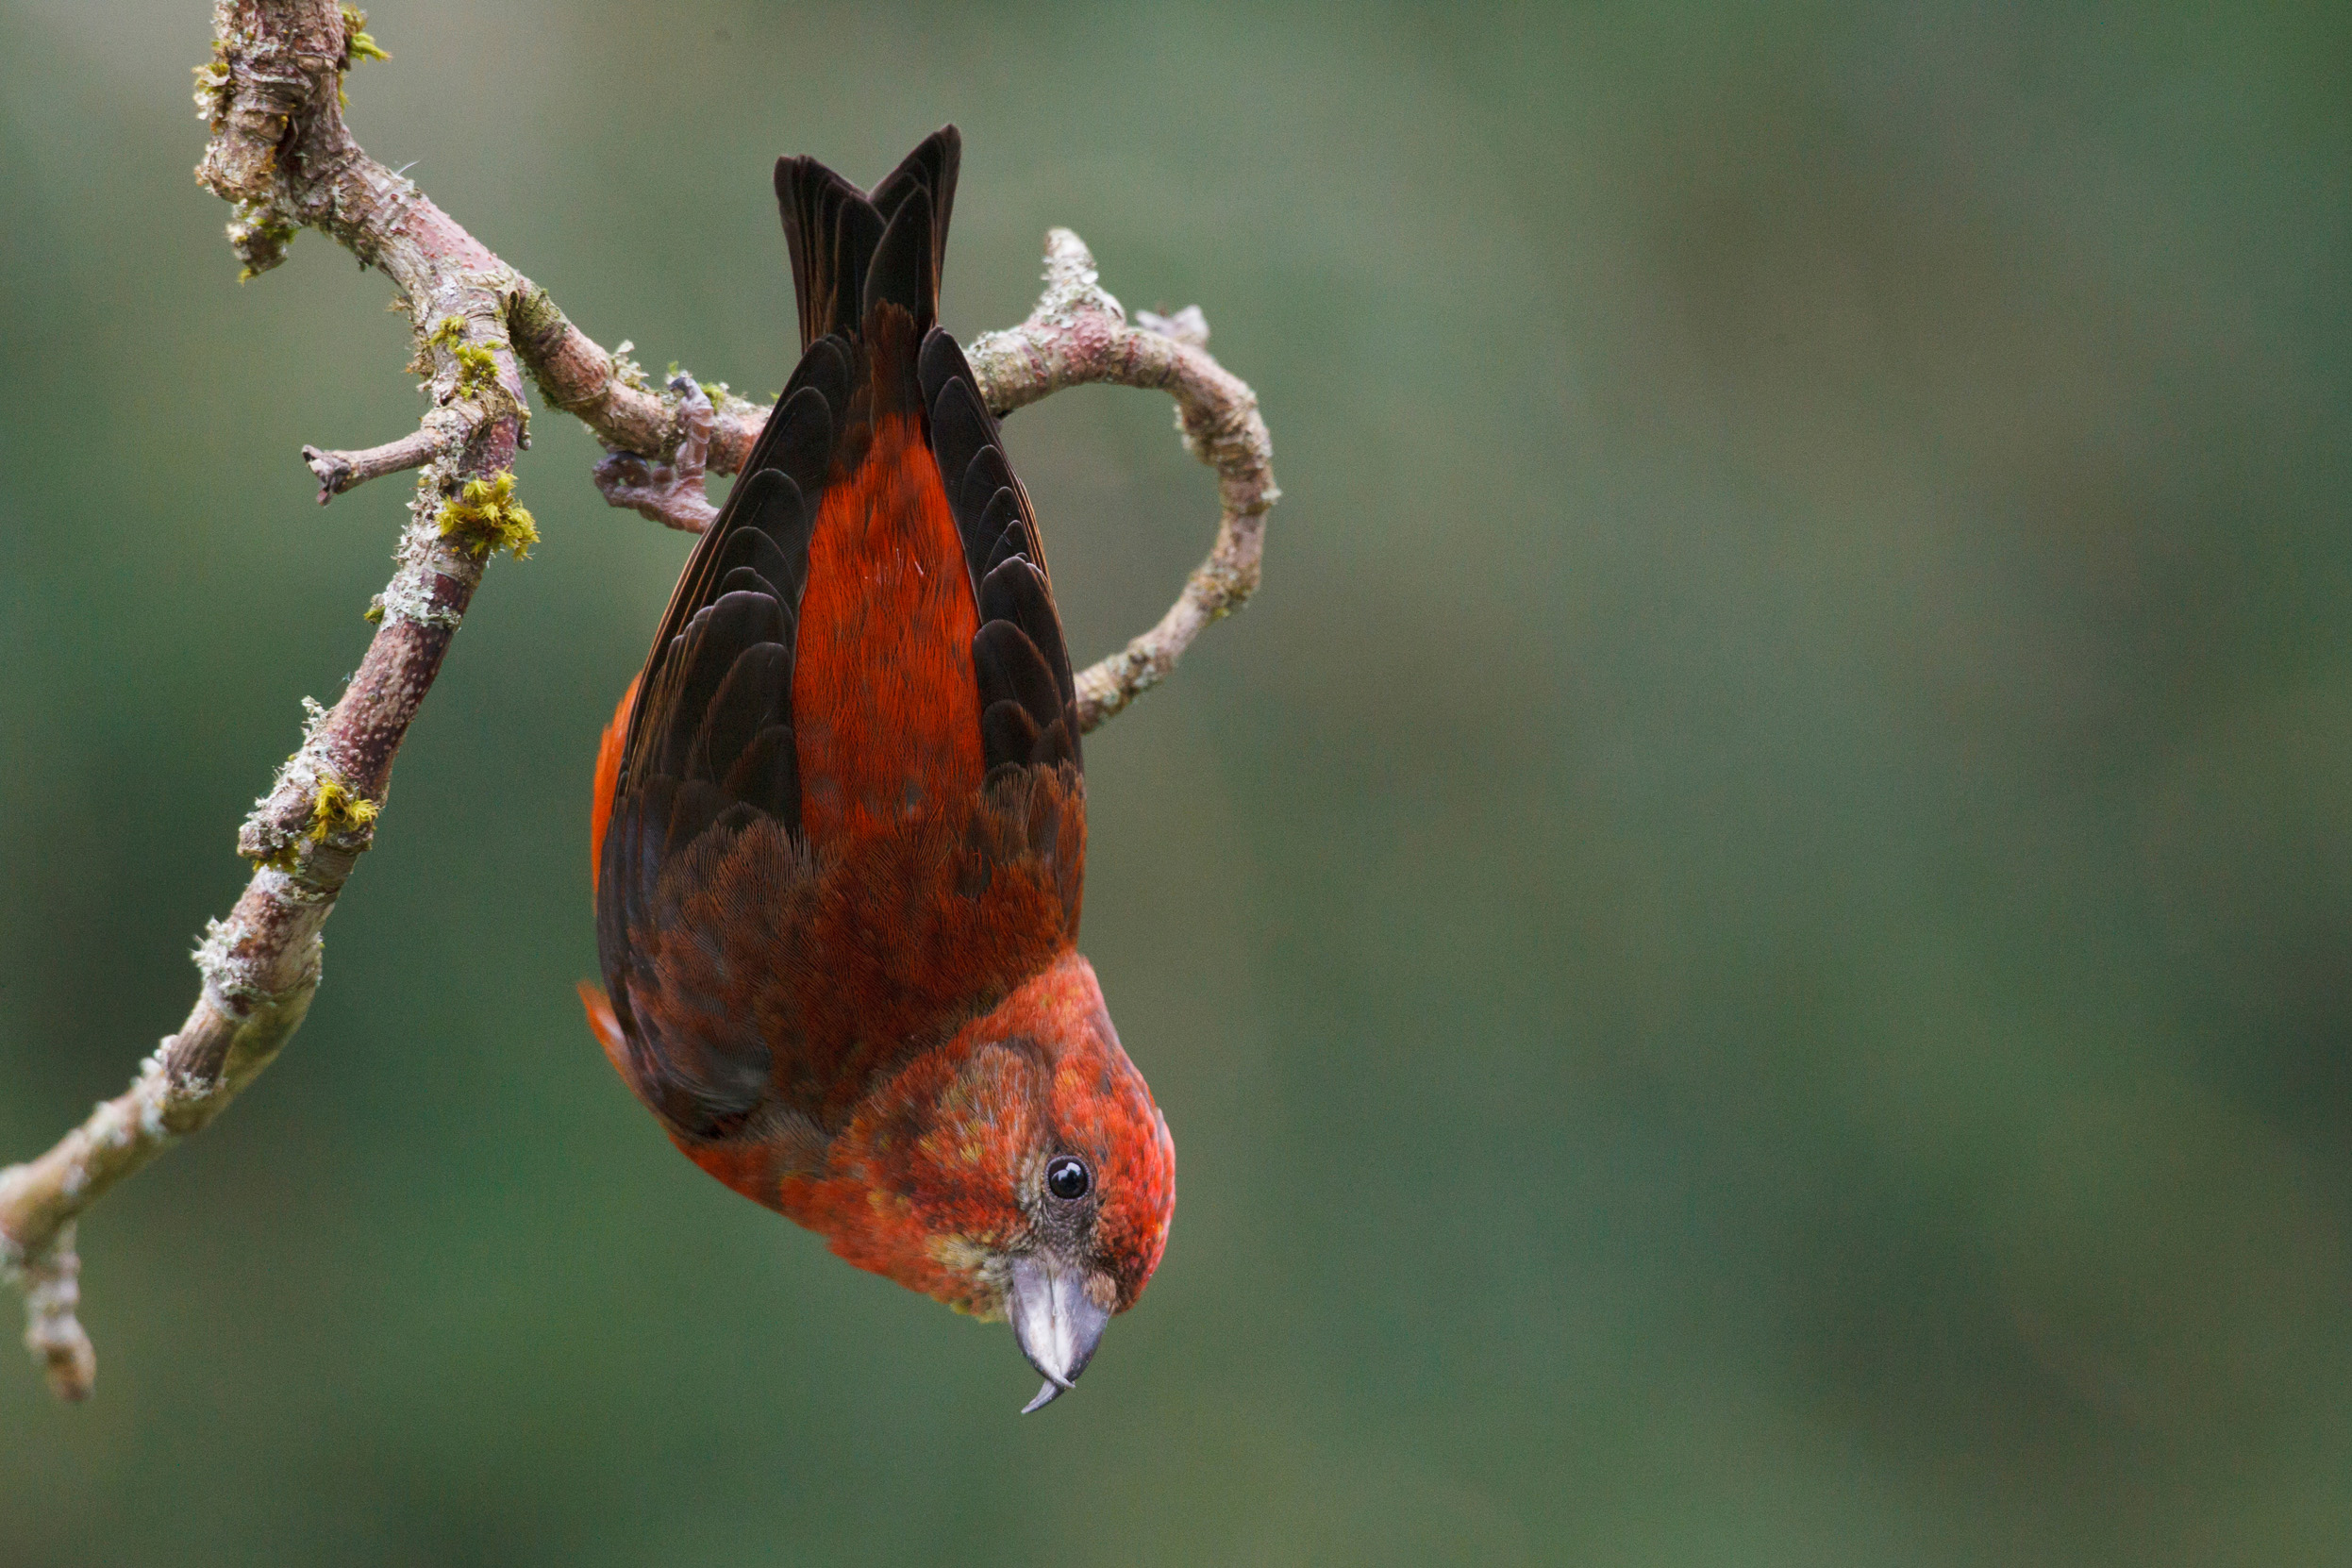 A male Crossbill hanging upside down from a tree branch.